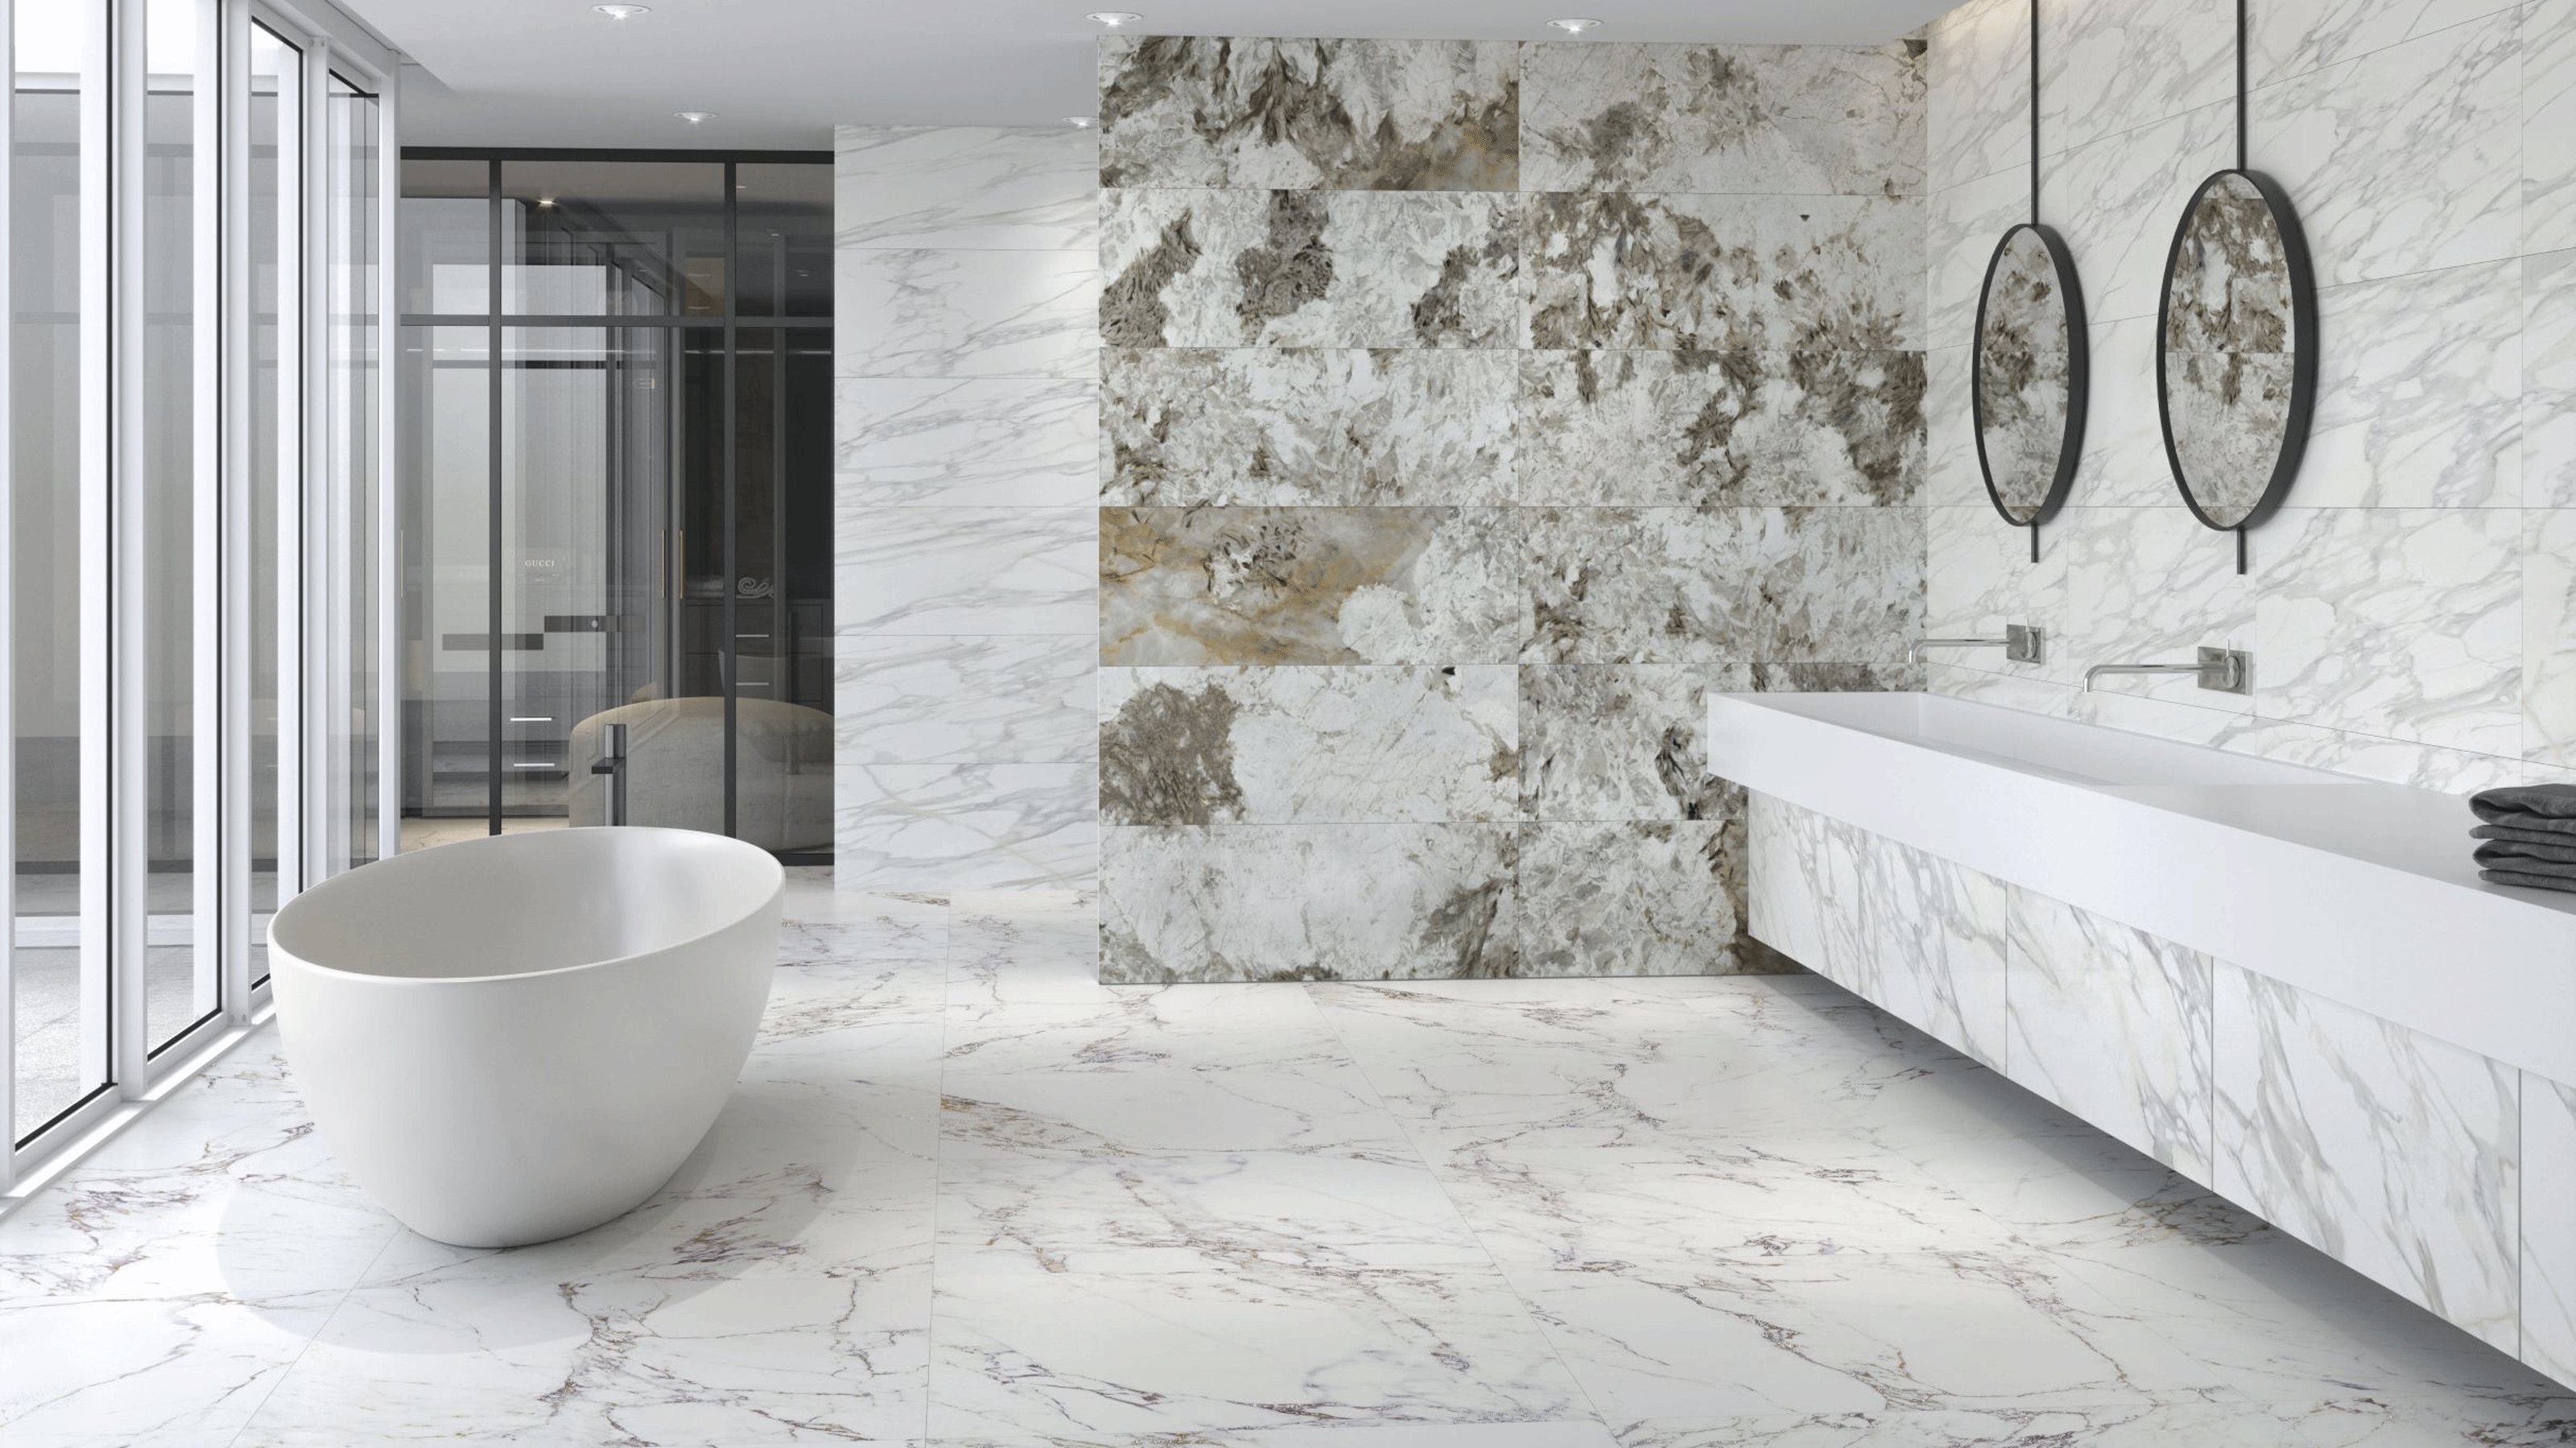 Marble bathroom covering floor and walls